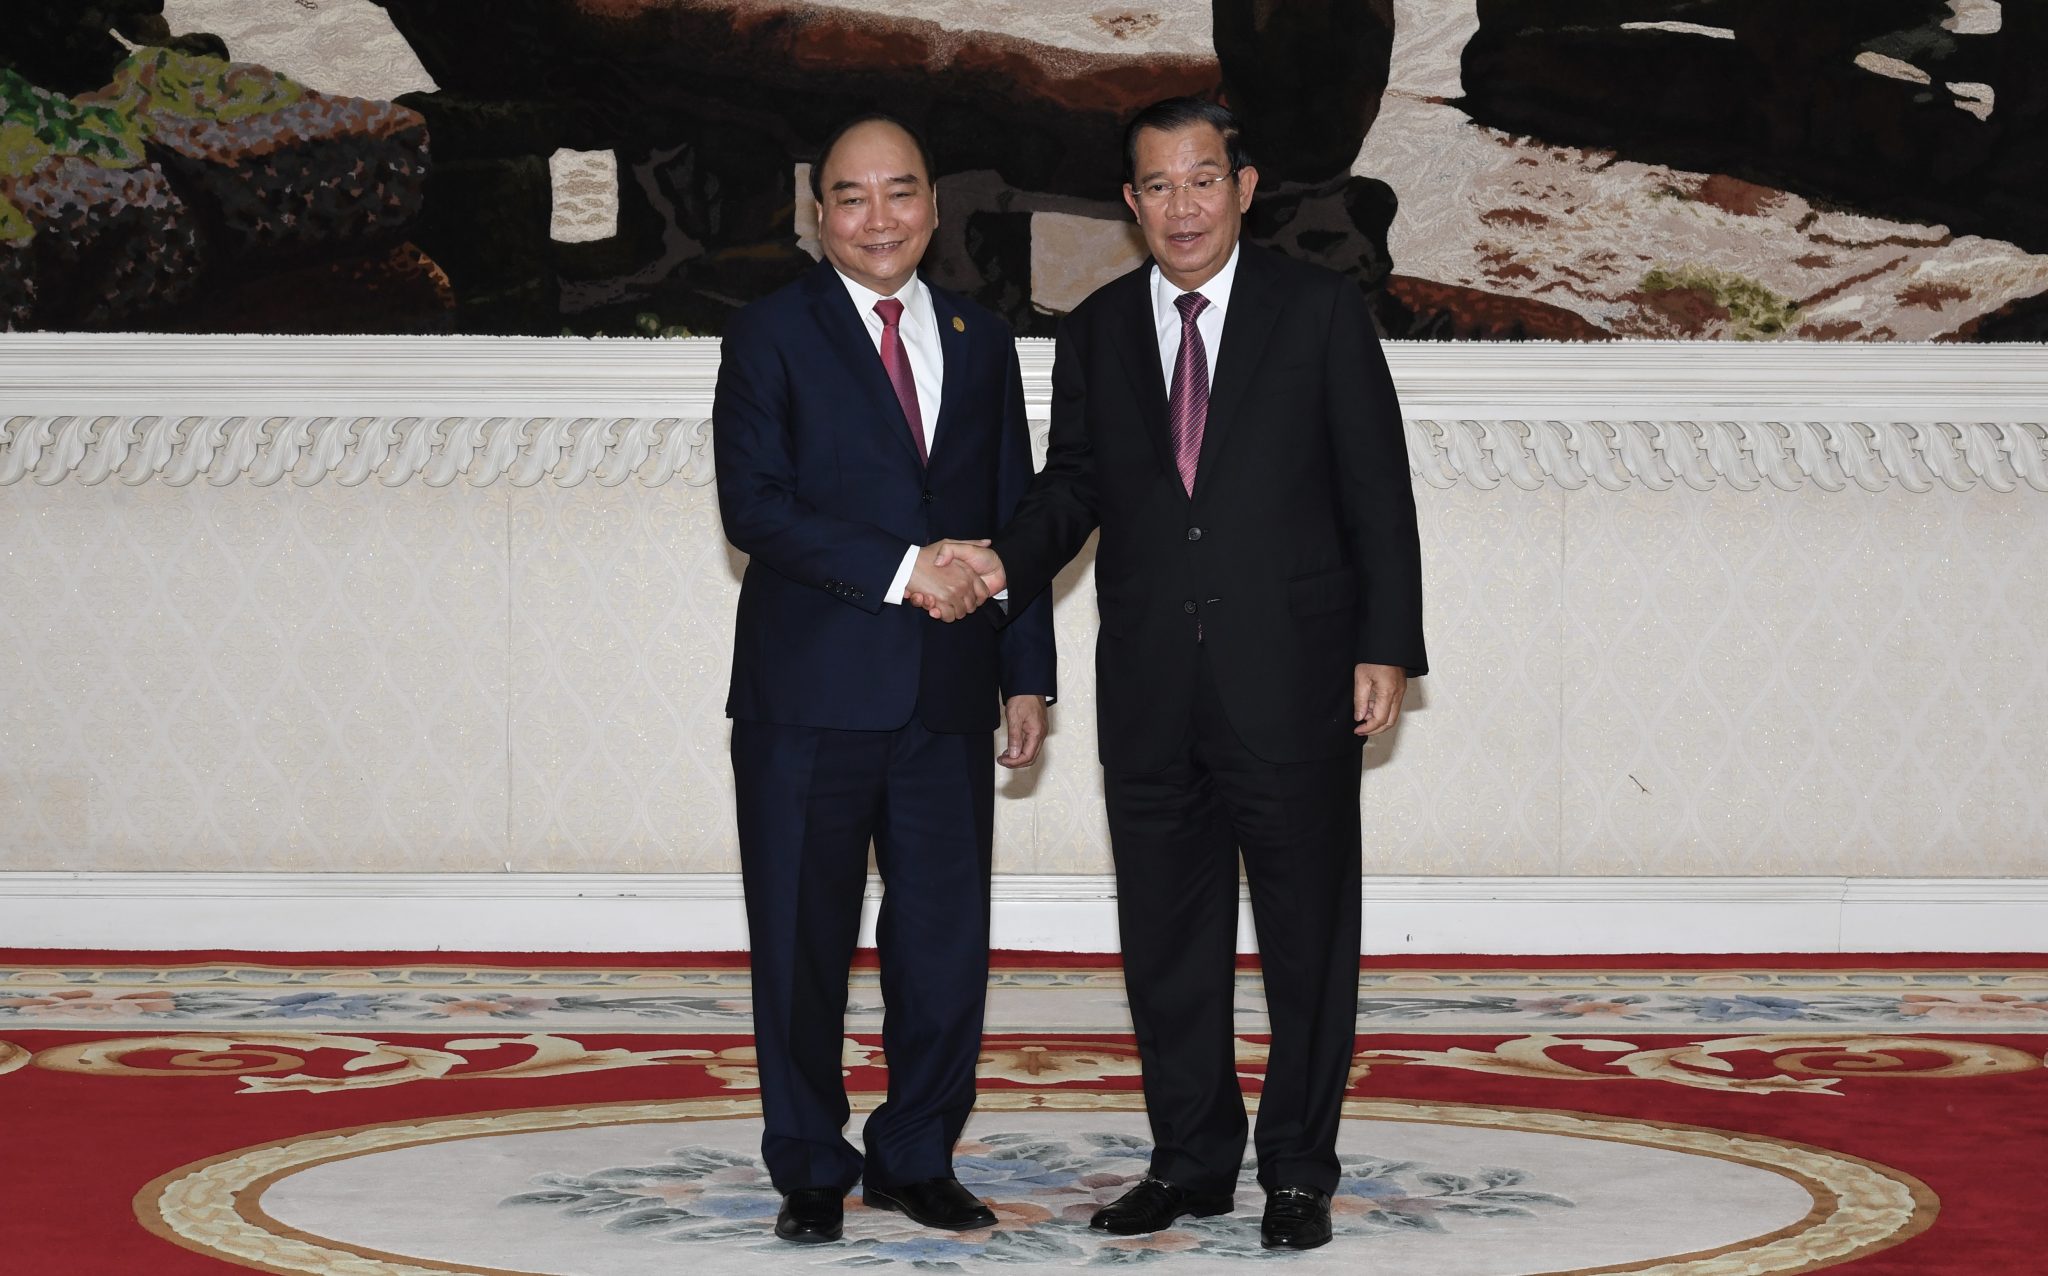 Prime Minister Hun Sen shakes hands with Vietnam President Nguyen Xuan Phuc before a meeting at the Peace Palace in Phnom Penh, December 21, 2021. CamboJA/ Hand Out photo from An Khuon SamAun National Television of Cambodia